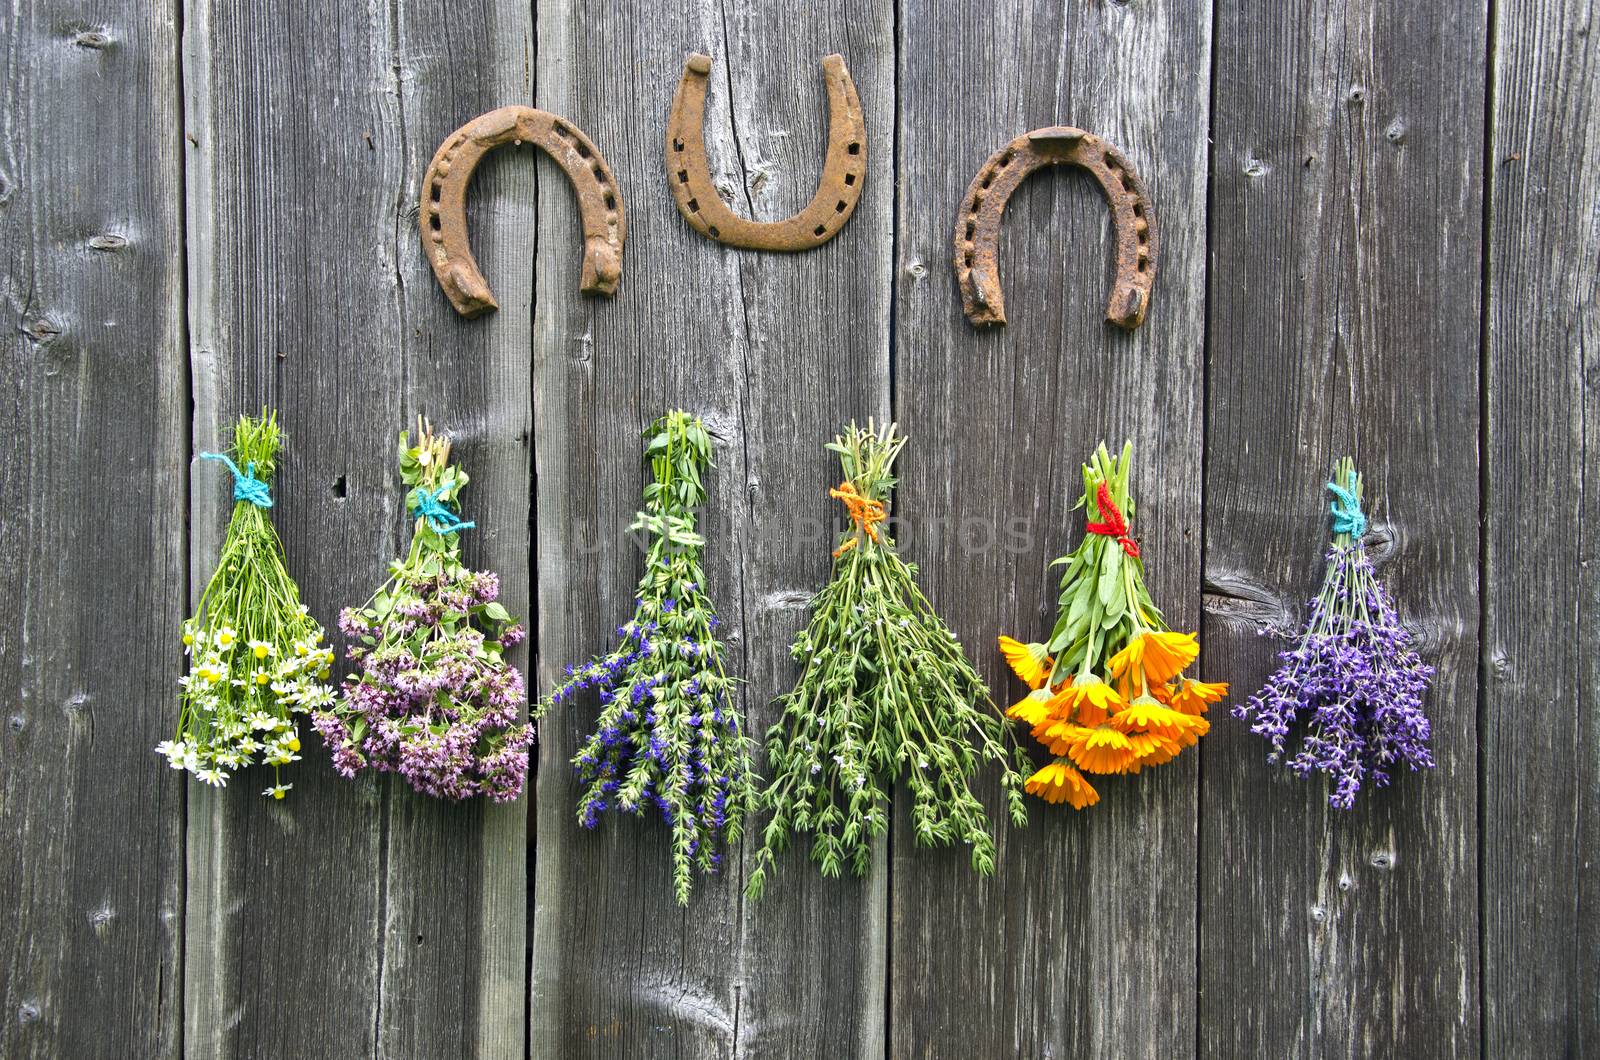 Bundles of various medical herbs and horseshoes hanging on wooden wall